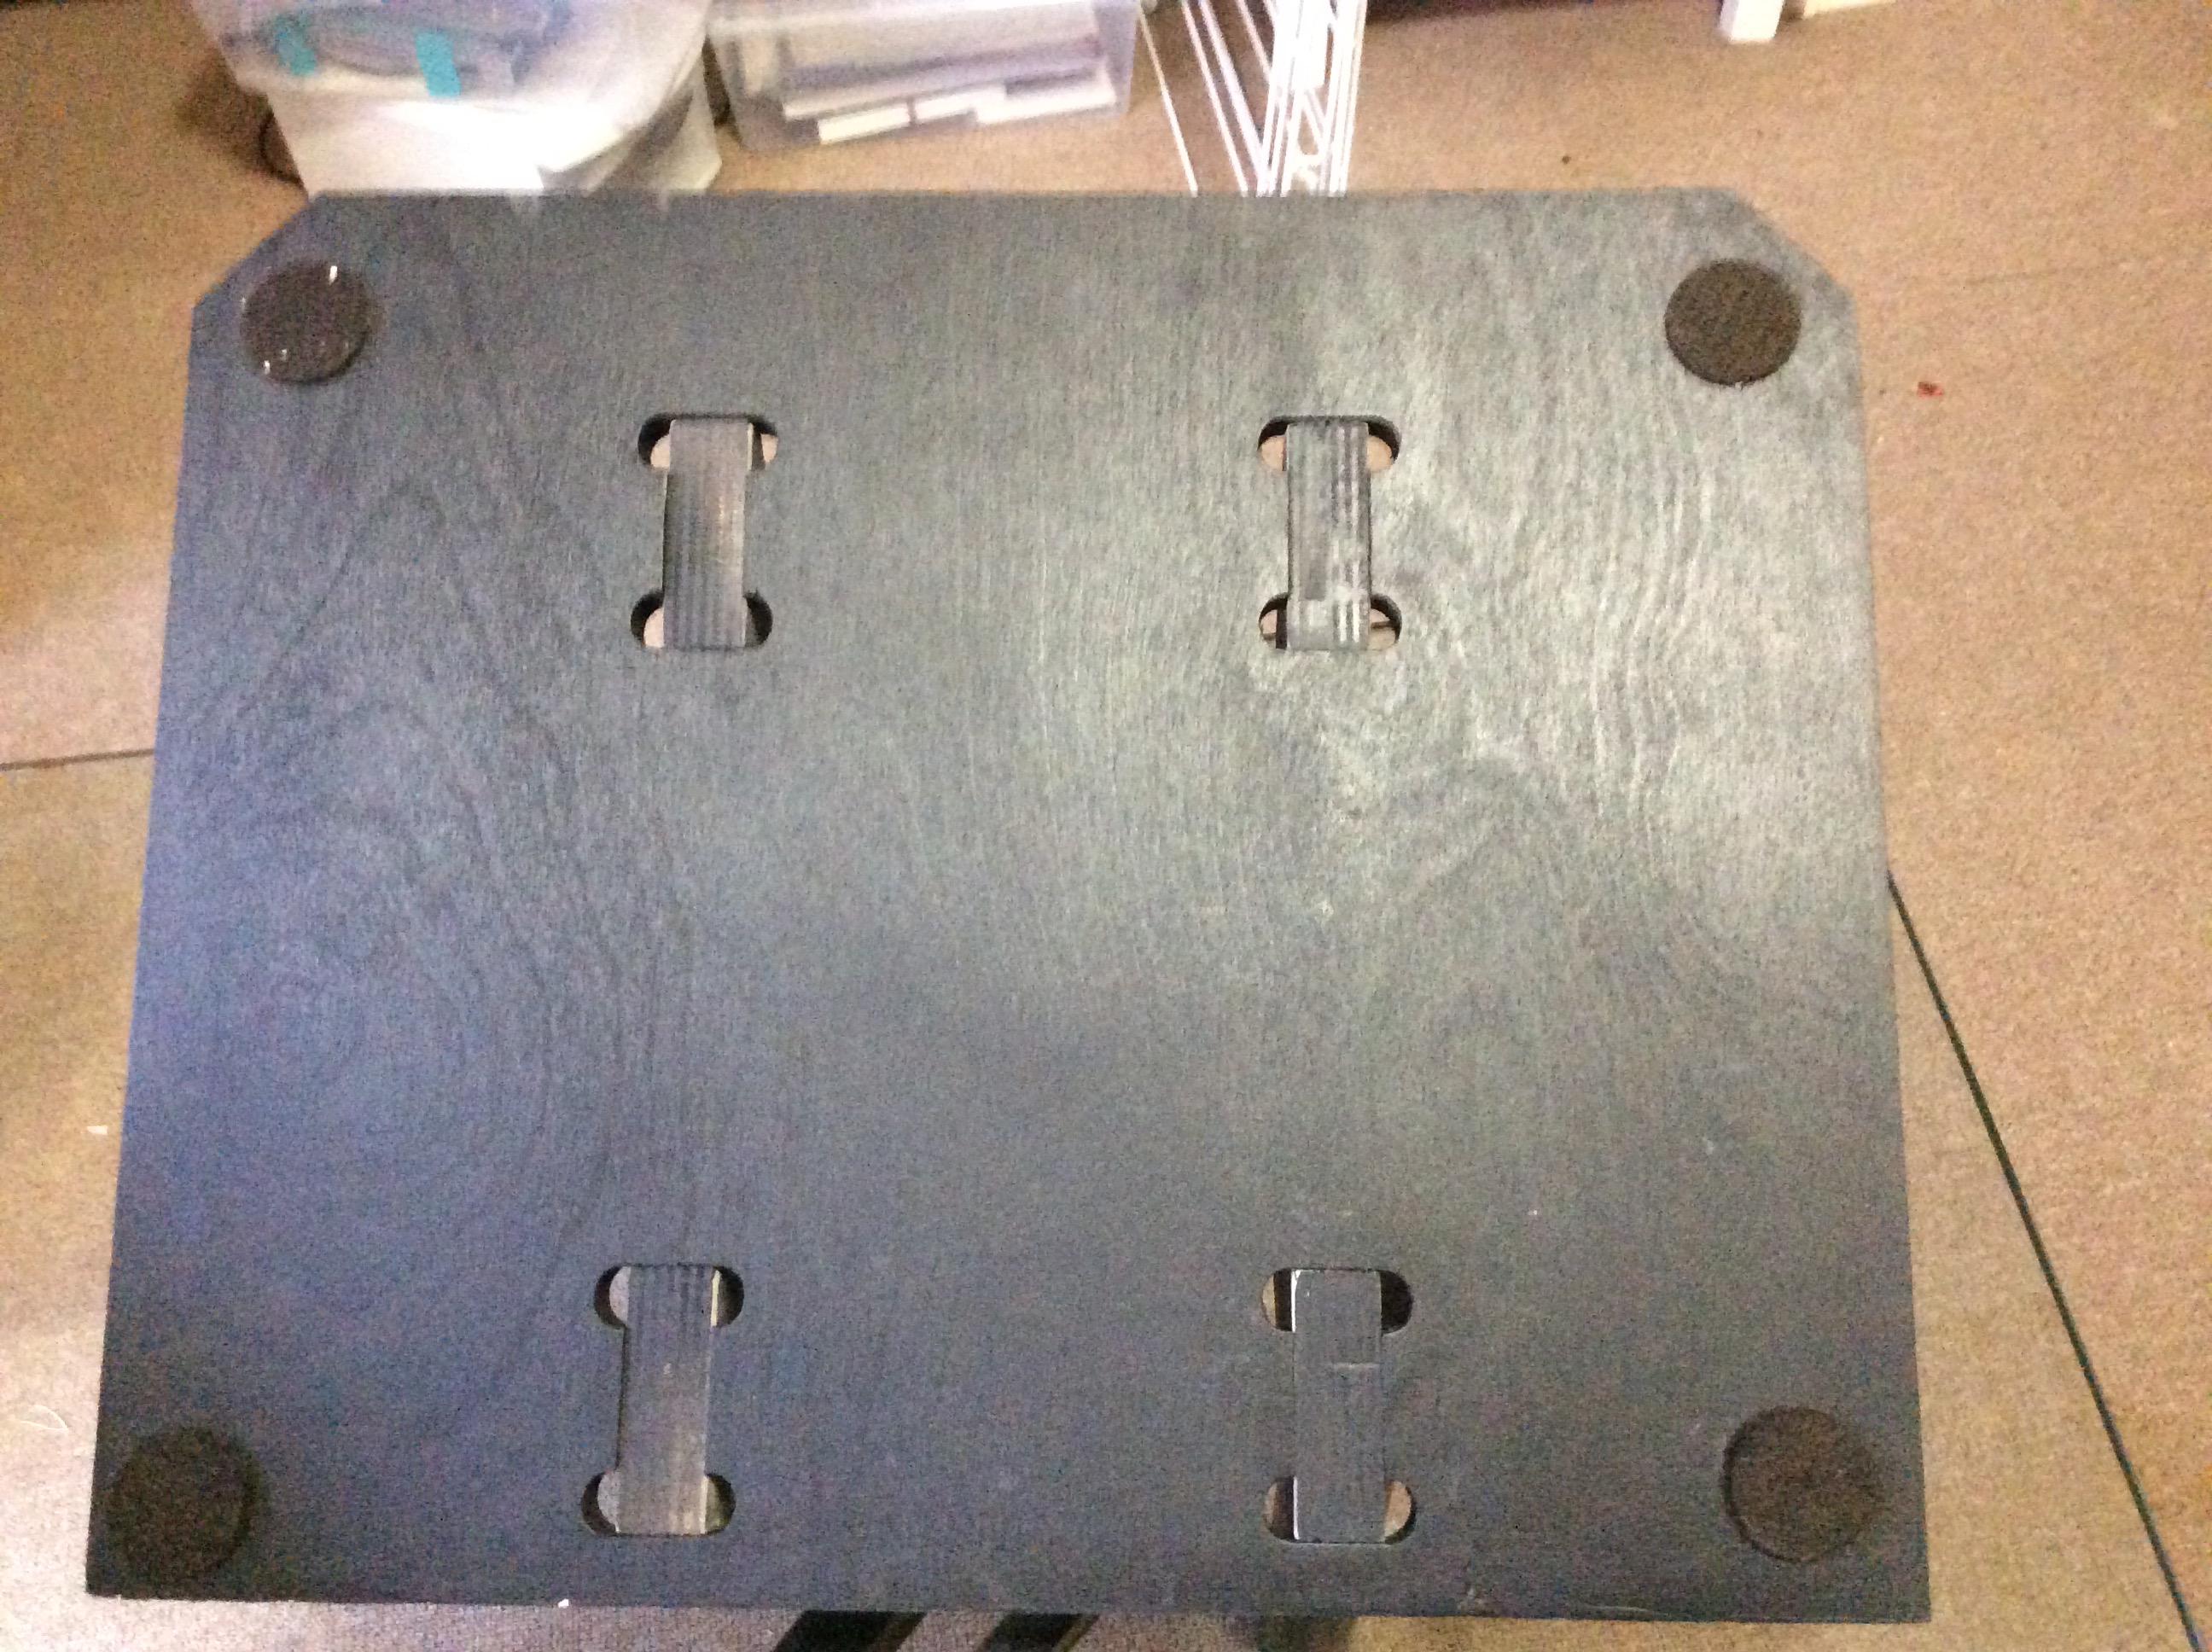 A cradle wing with pads to protect the platen.